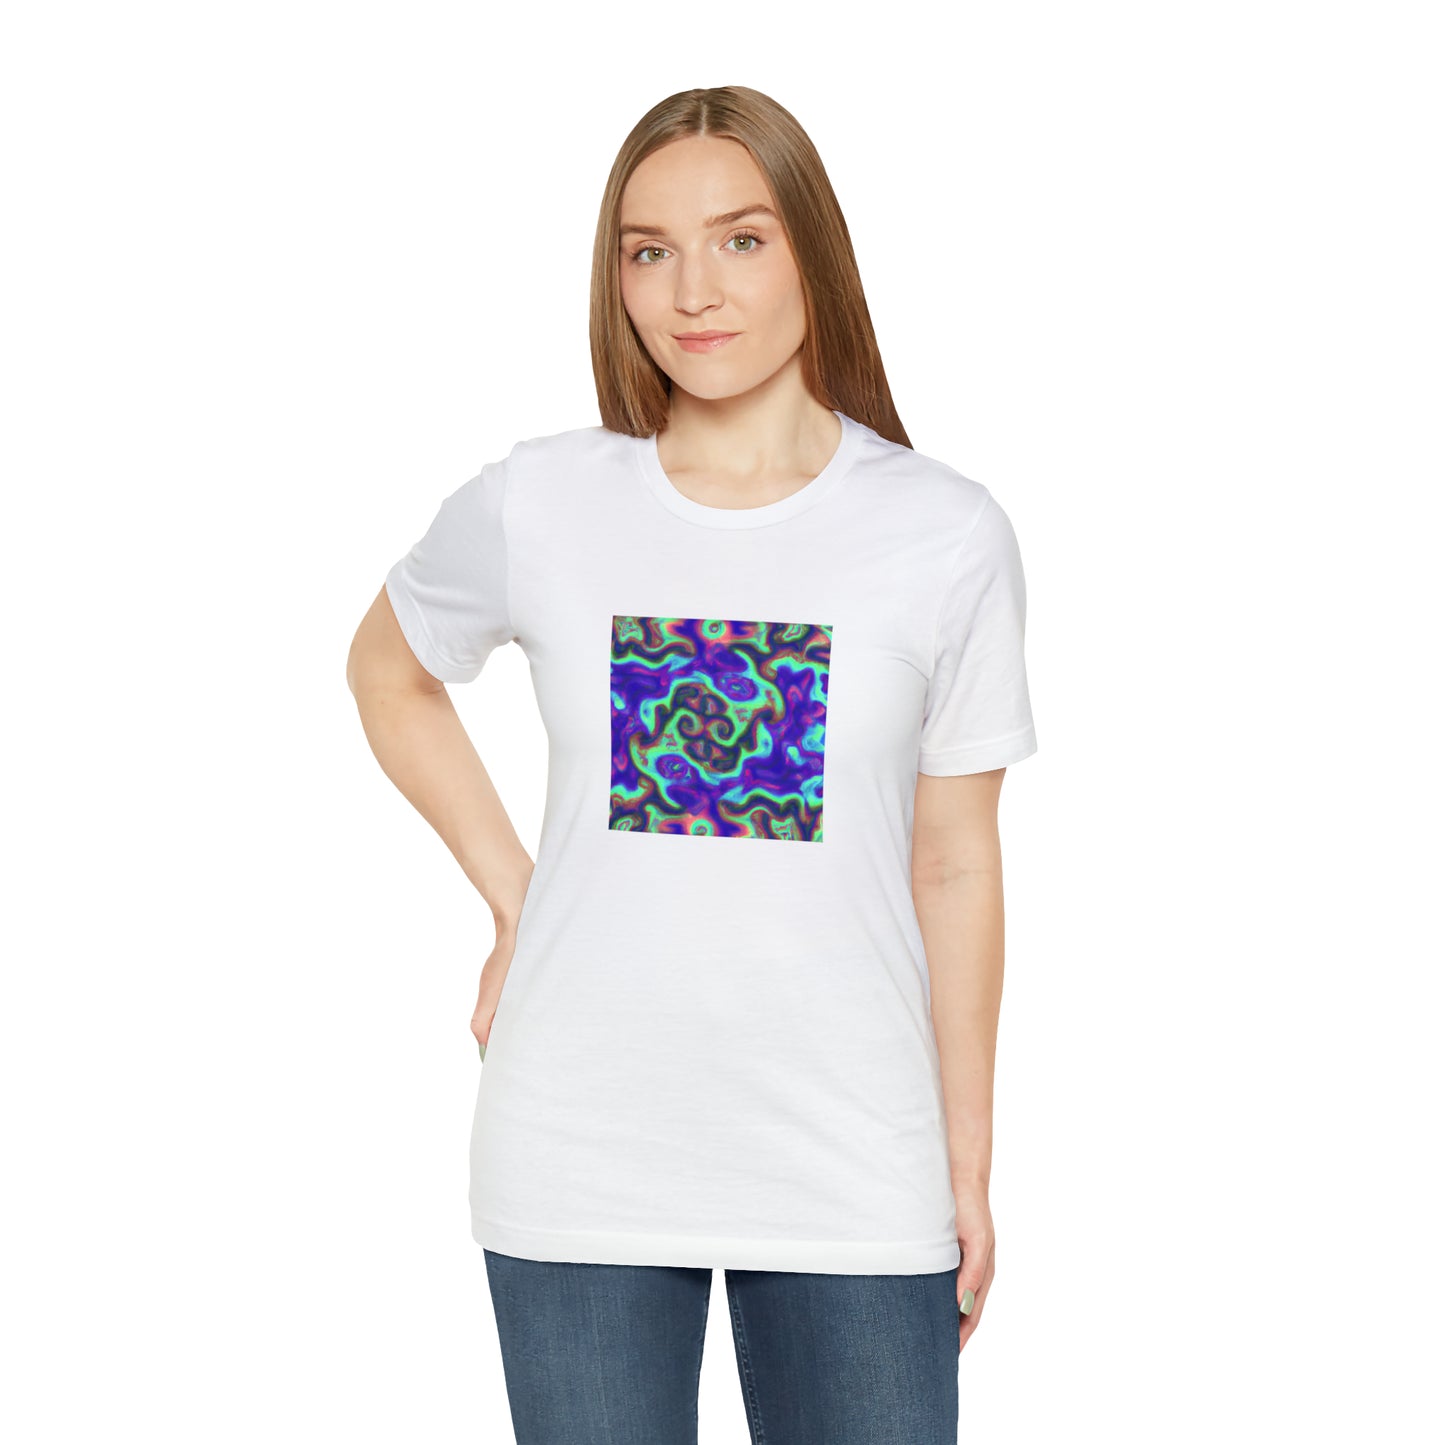 Victor Vogue - Psychedelic Trippy Pattern Tee Shirt